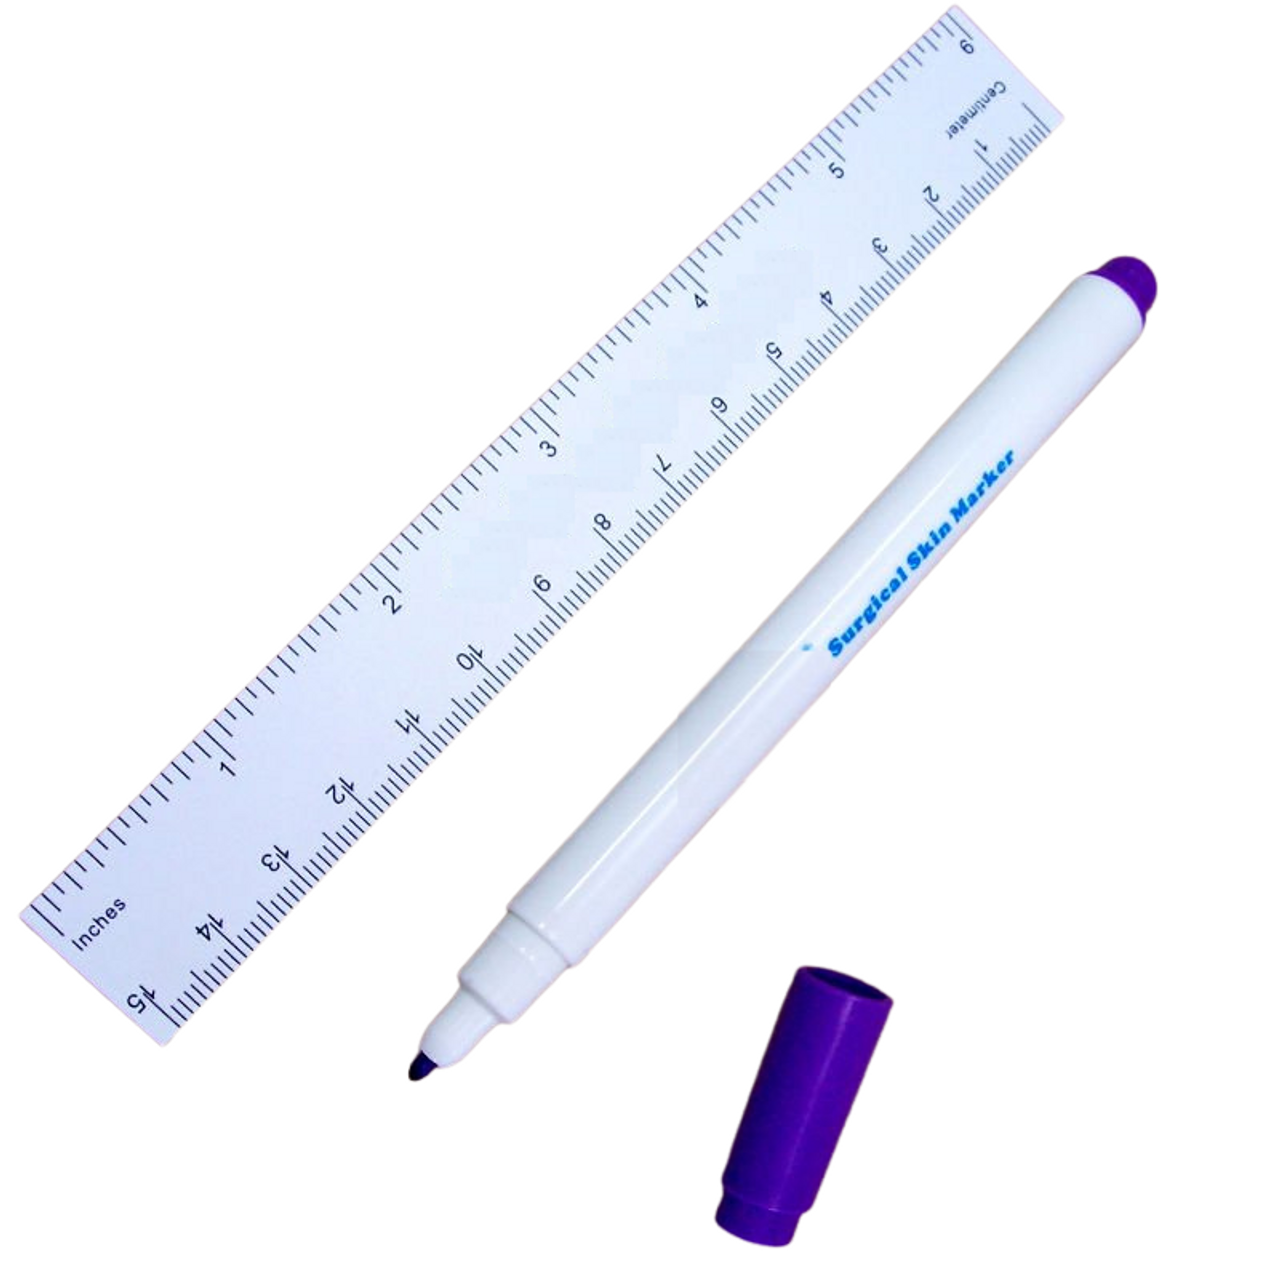 JimKing Surgical Skin Marker Pen, Professional Sterile Stencil Marker Pen  with Paper Ruler for Microblading, Waterproof Disposable Marker for Skin